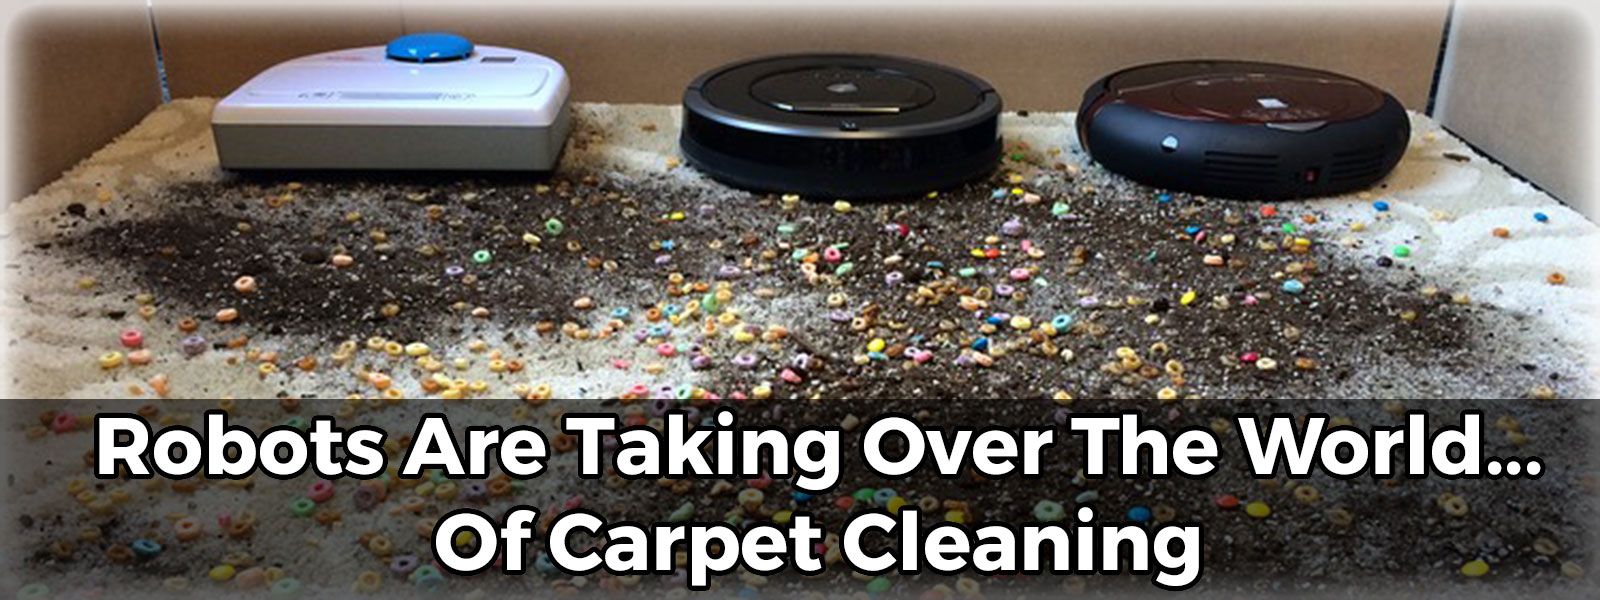 robots-are-taking-over-the-world-of-carpet-cleaning-gold-coast